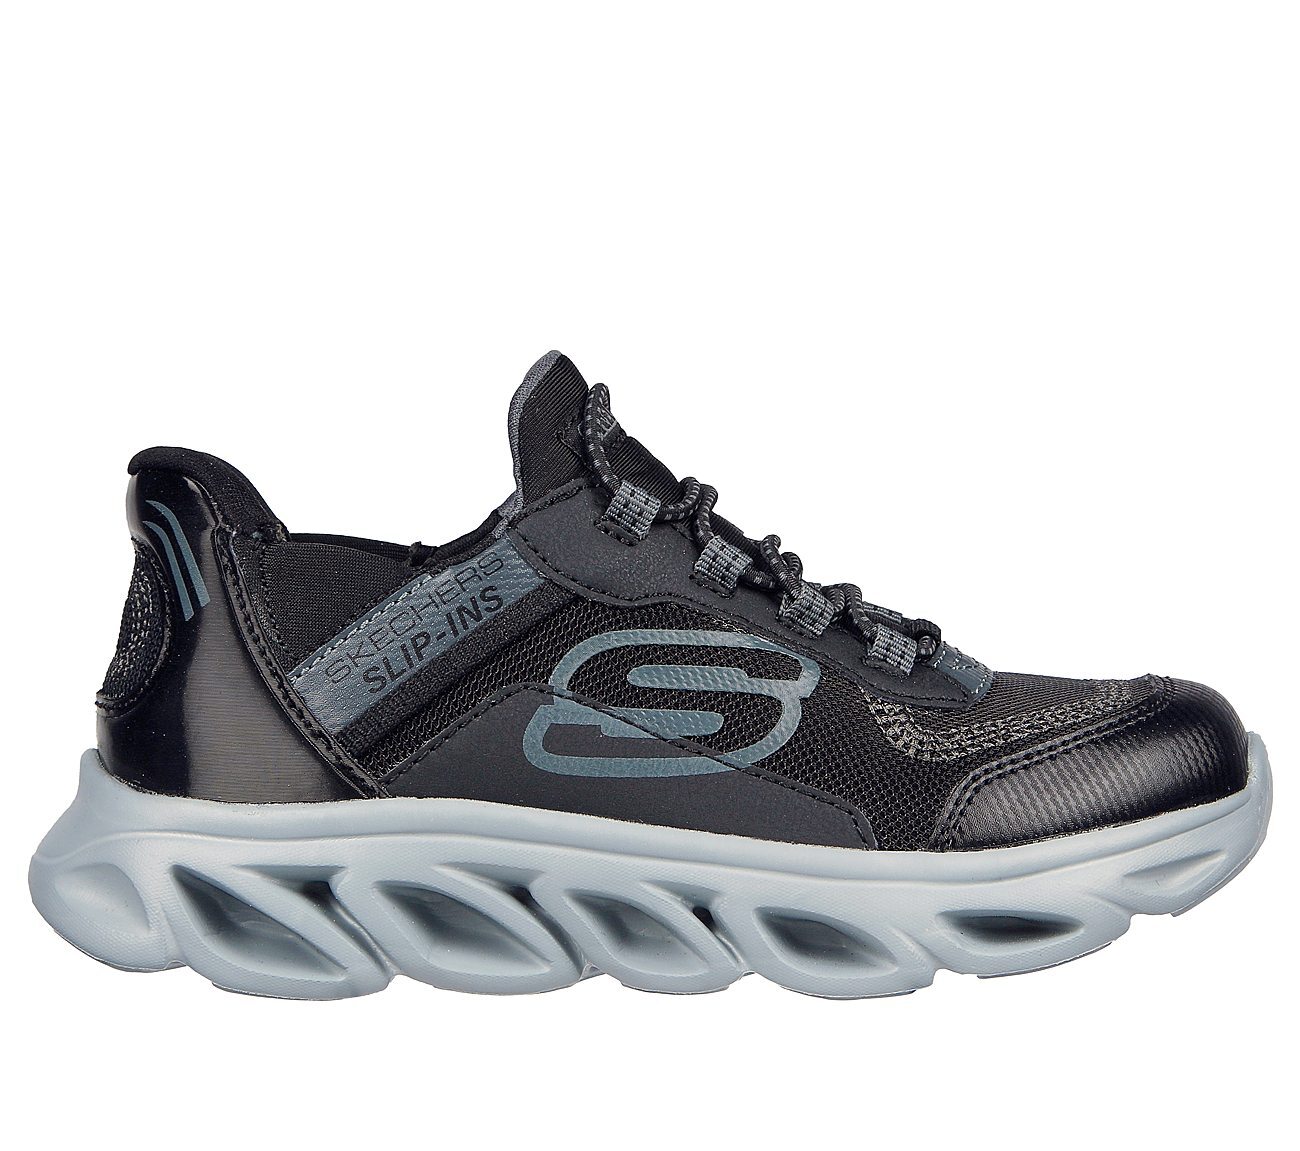 FLEX GLIDE, BLACK/CHARCOAL Footwear Lateral View